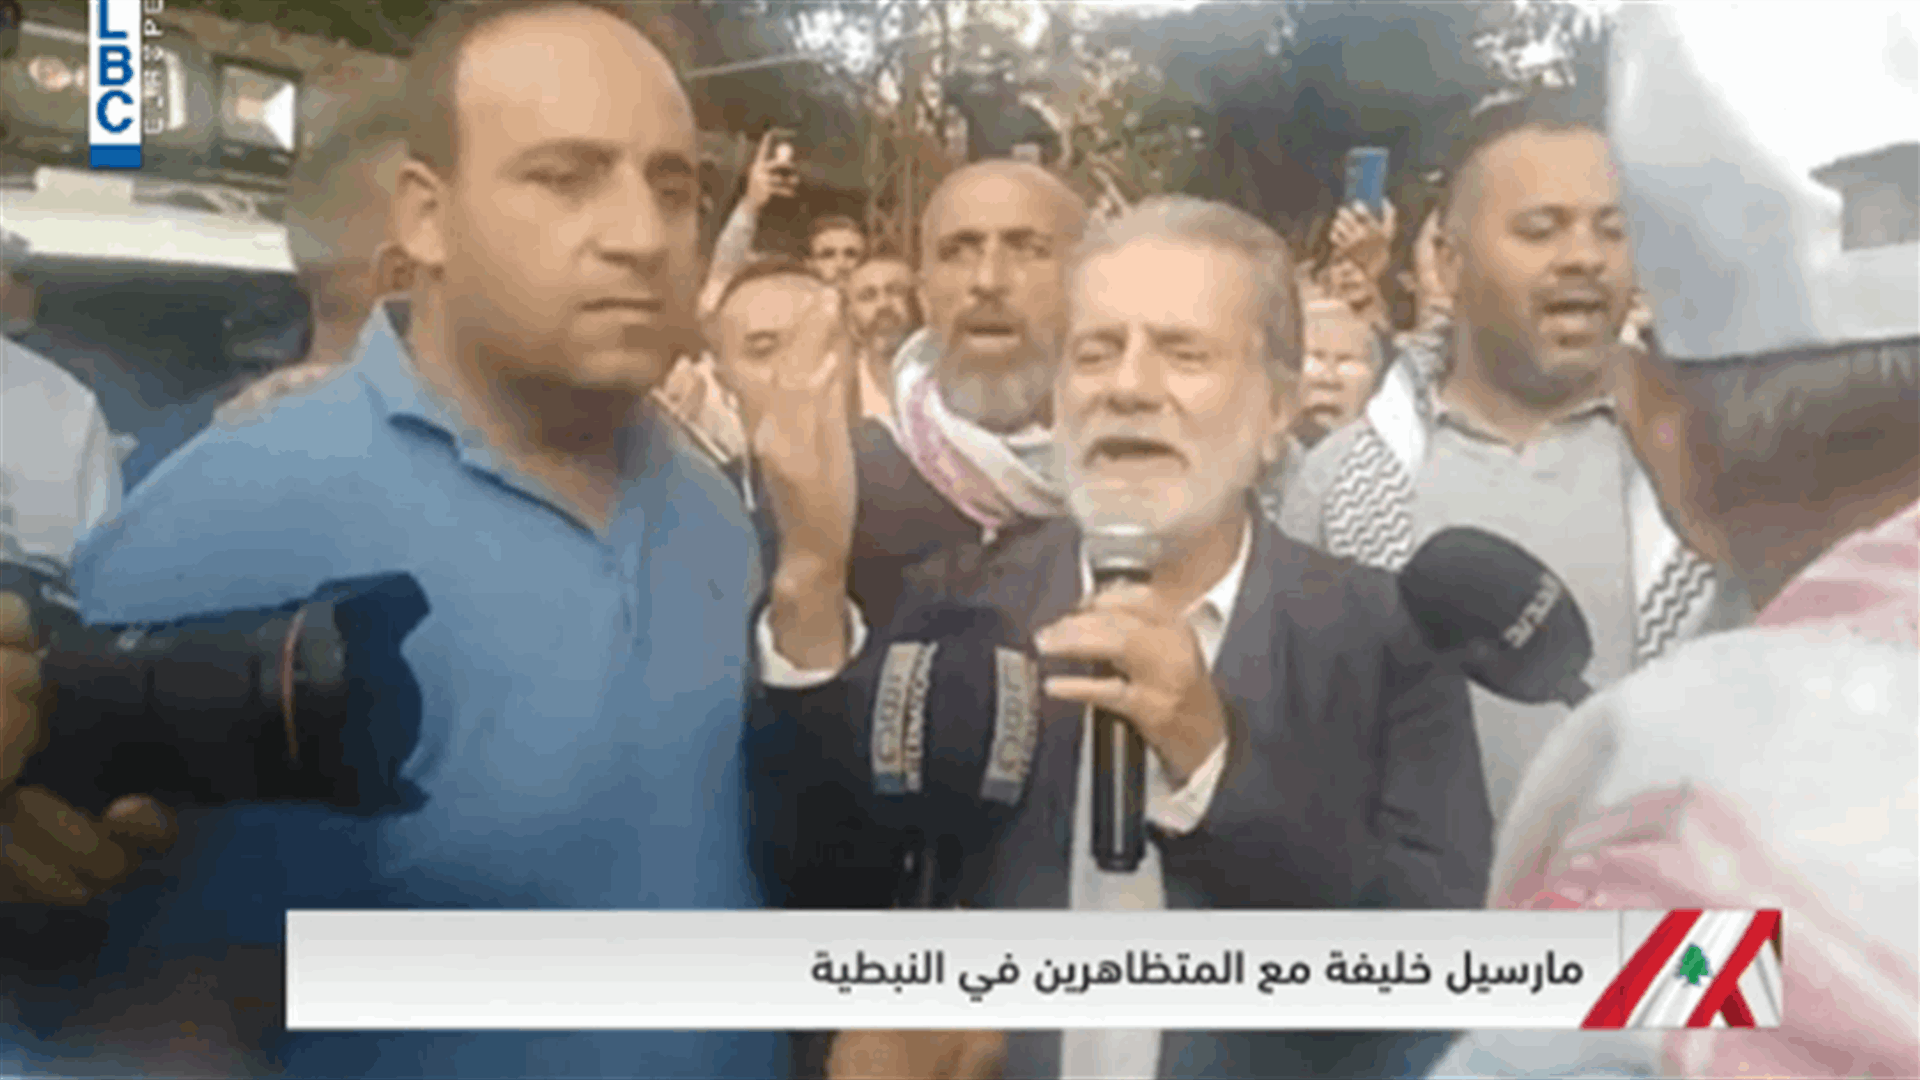 Renowned singer and songwriter Marcel Khalife joins Nabatieh protesters-[VIDEO]